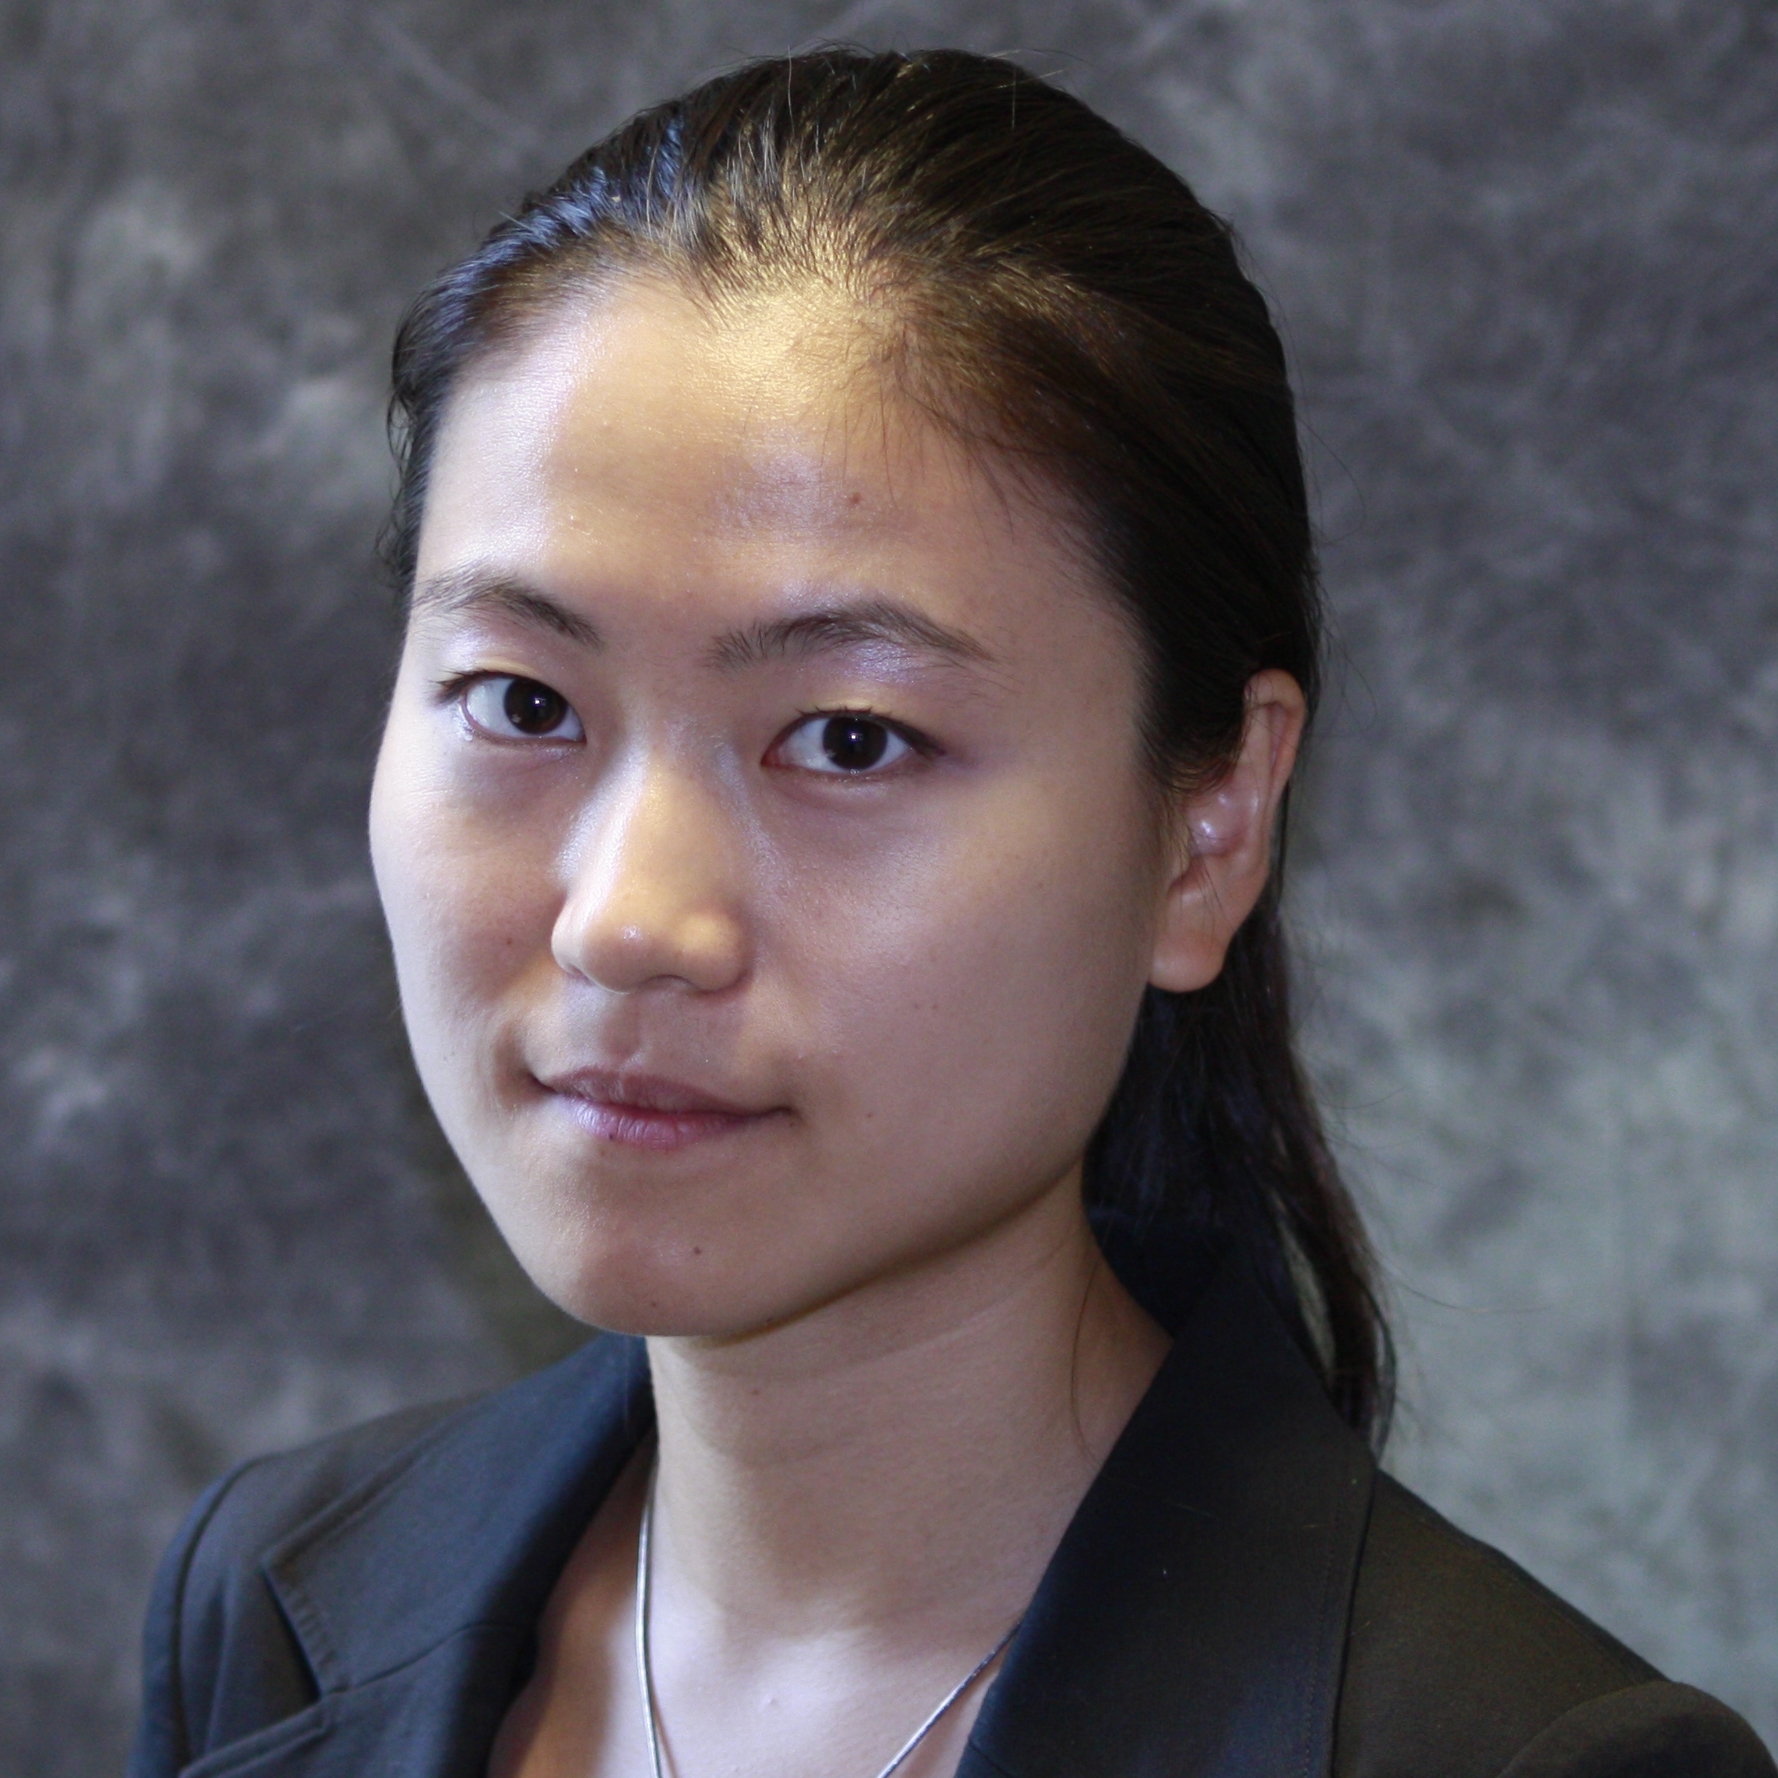 Profile photo for Xiao Lin, Ph.D.